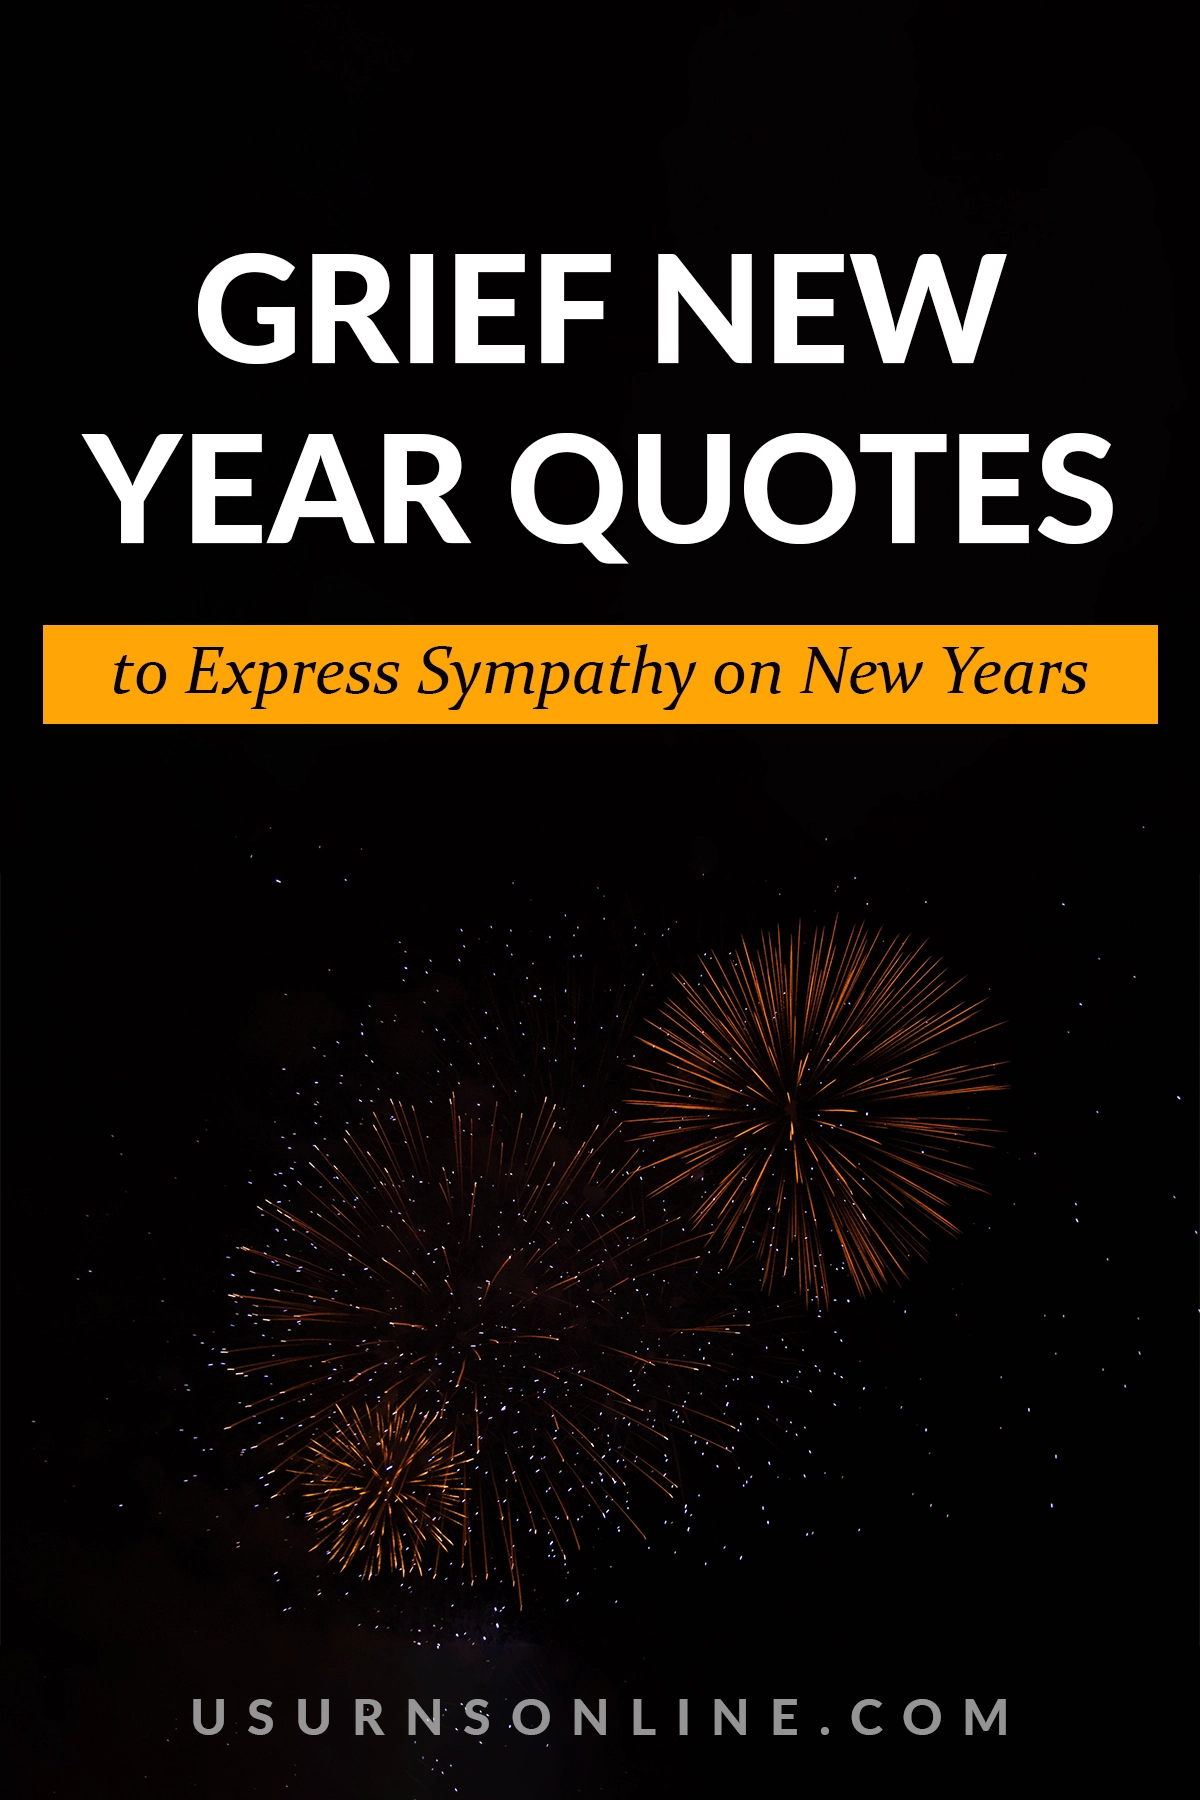 grief new year quotes - feature image